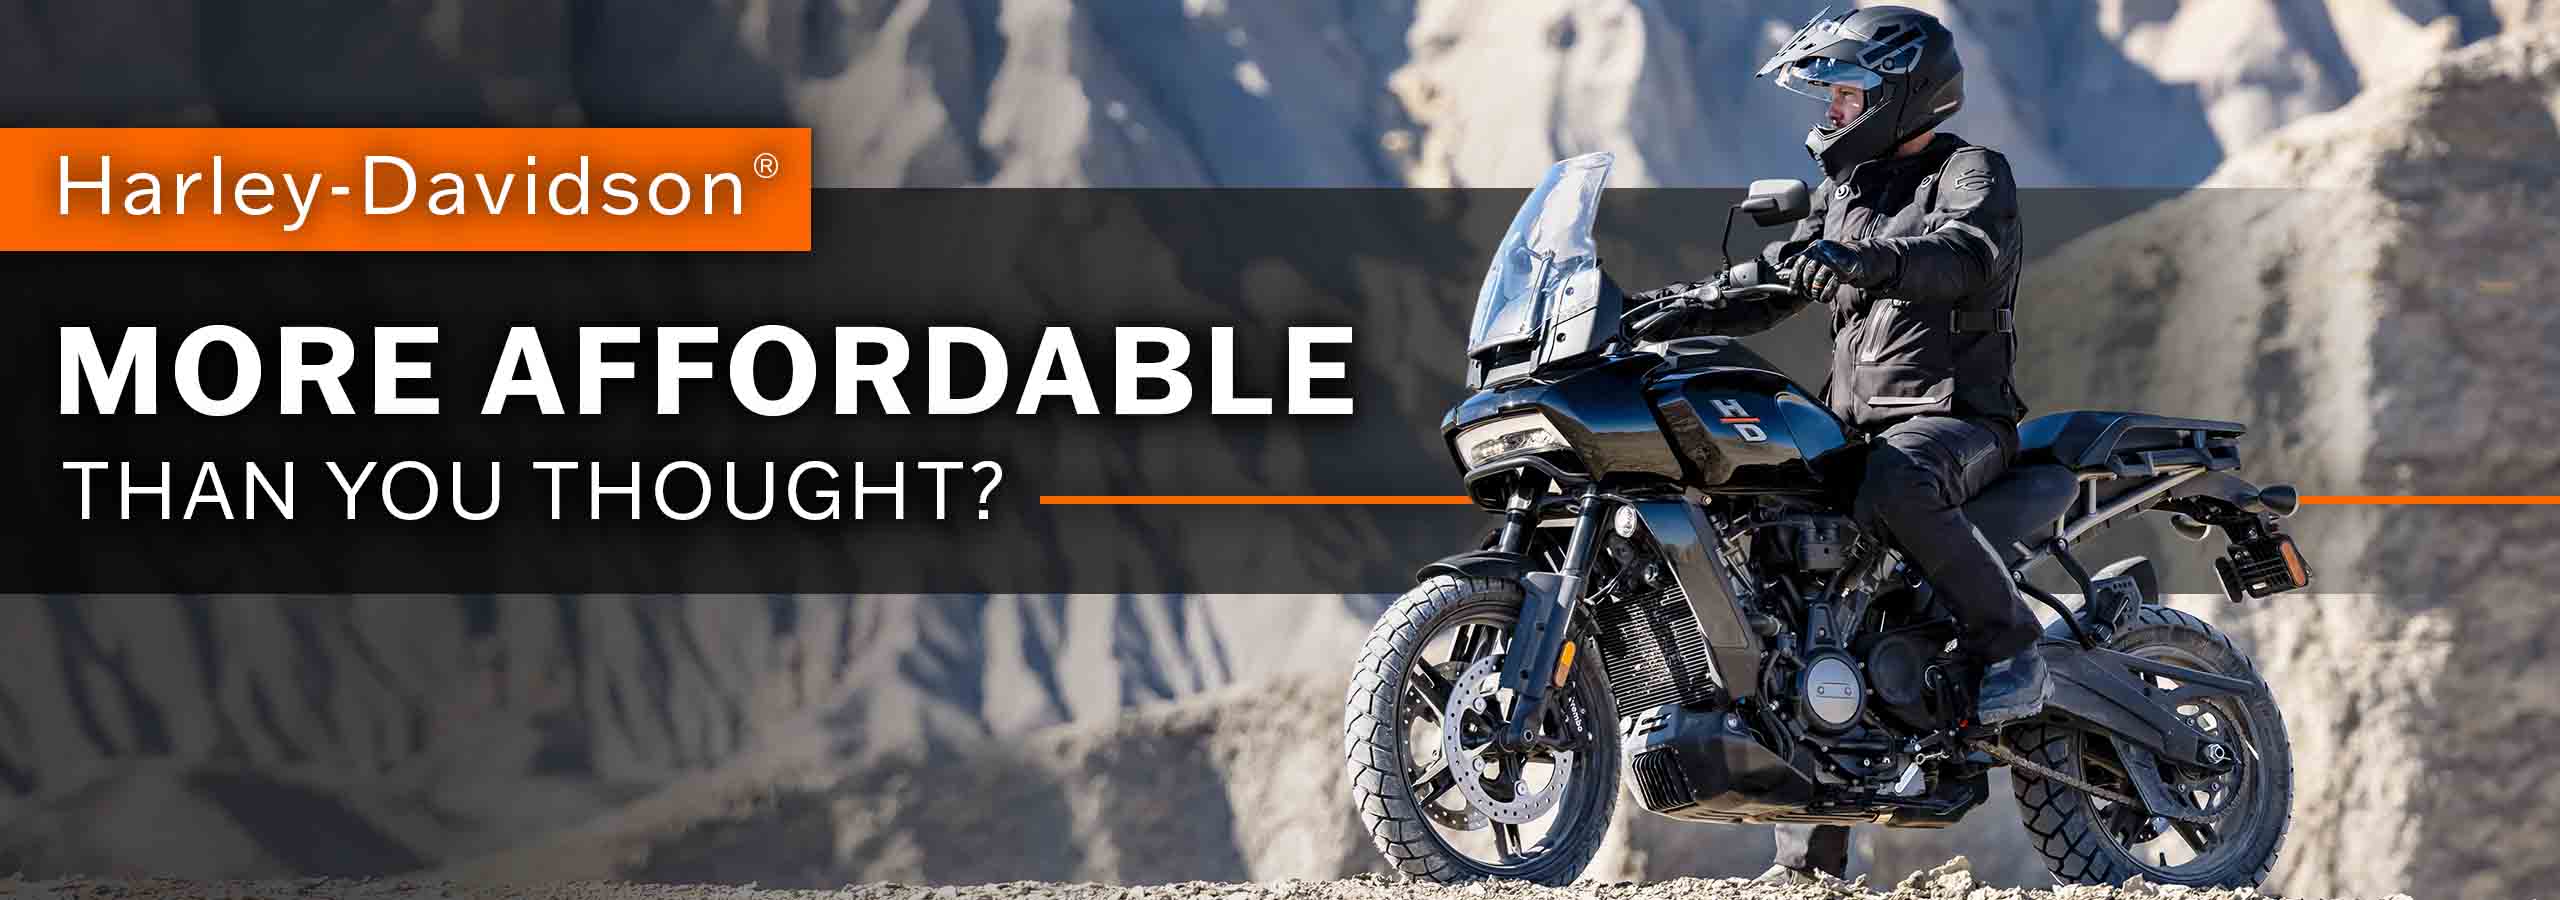 A Harley-Davidson Could Be More Affordable Than You Thought